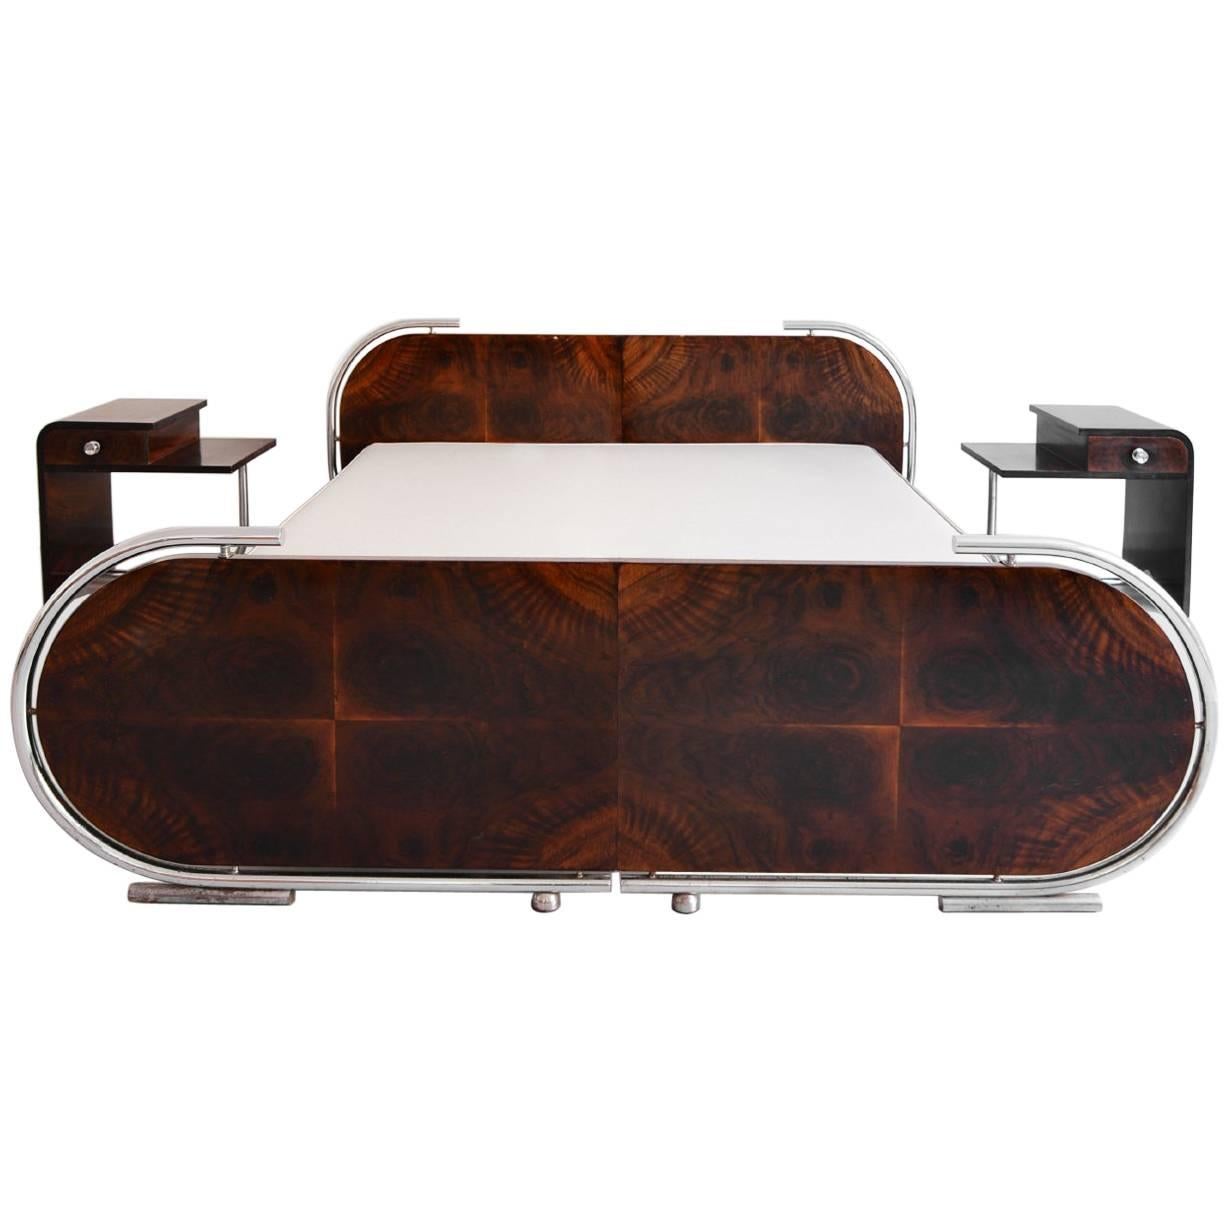 Art Déco-Streamline Double Bed, Tubular Steel, Painted Wood, Germany, circa 1930